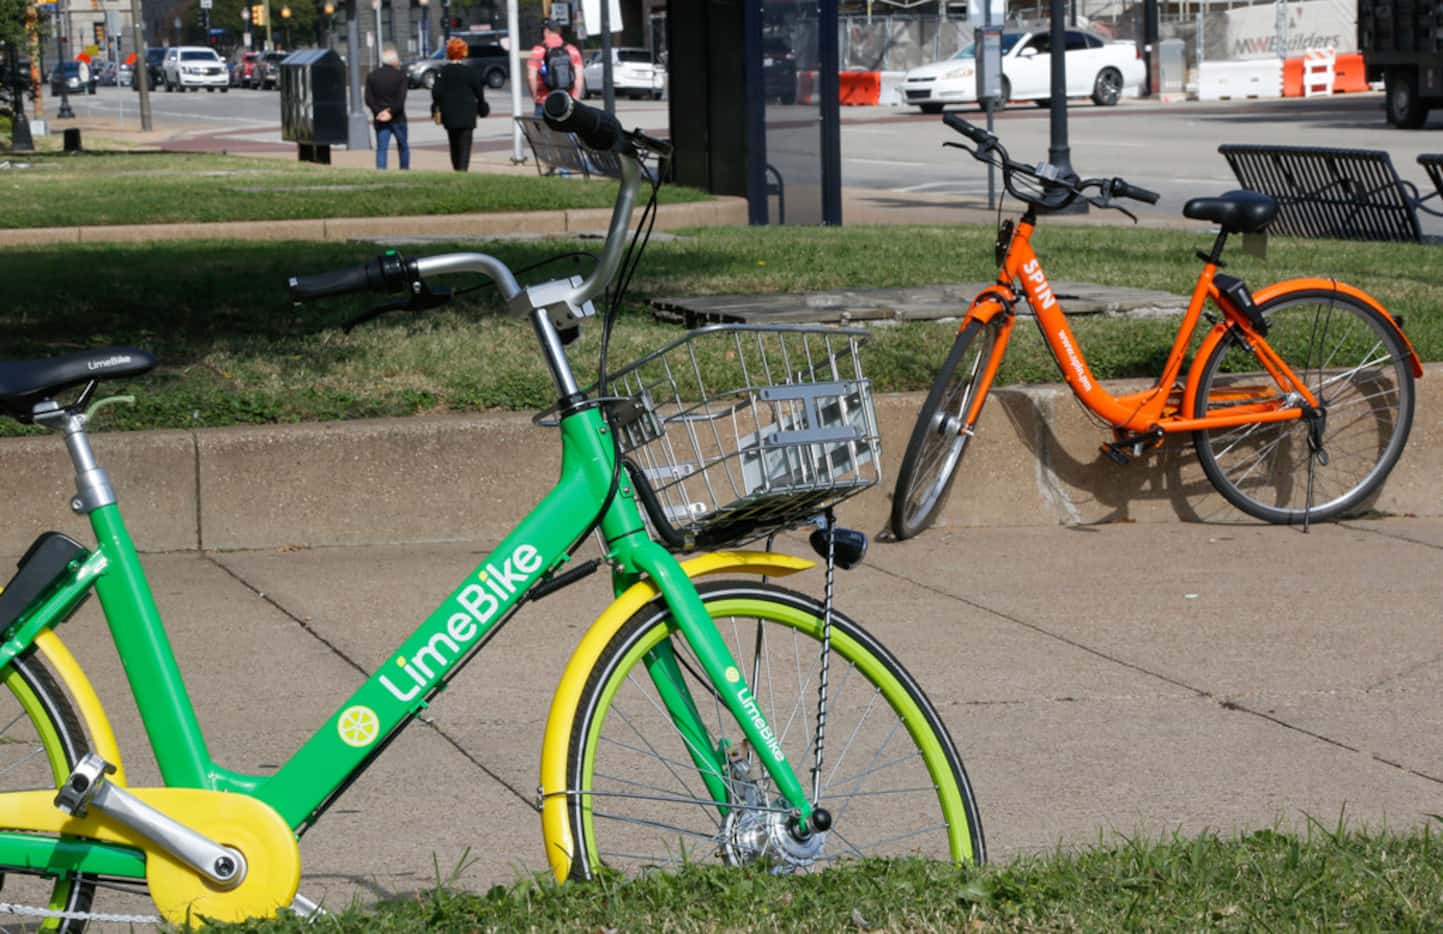 A LimeBike and Spin bike are left in front of Union Station in downtown Dallas.